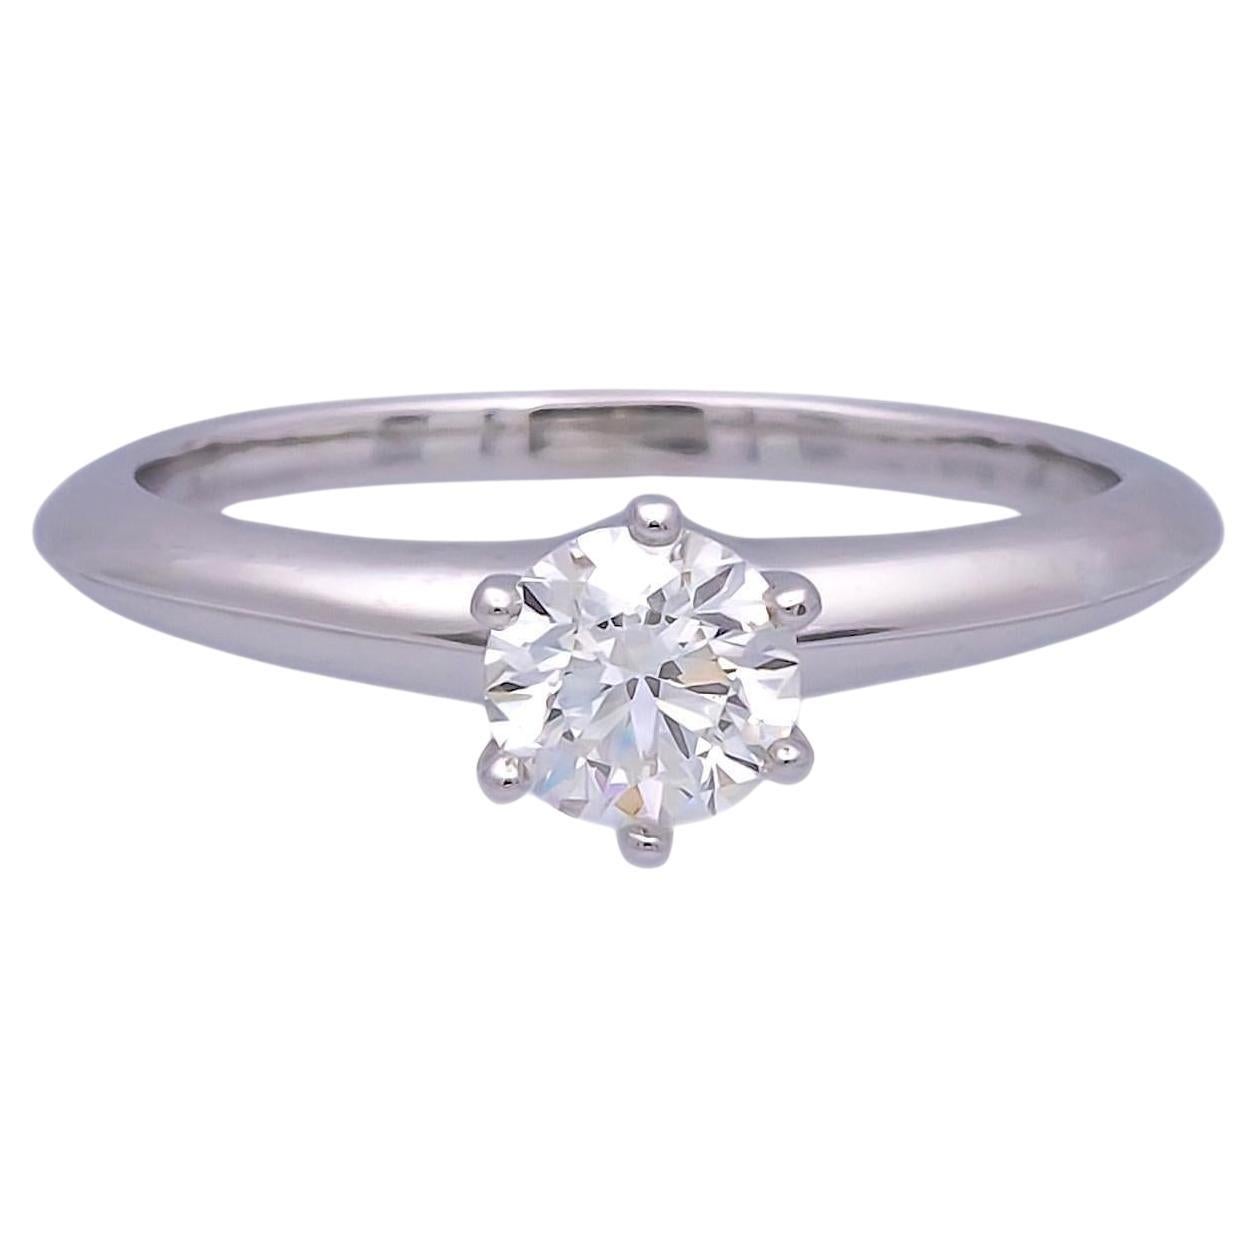 Tiffany & Co Platinum Solitaire GIA Round Diamond Engagement Ring .70 G SI1